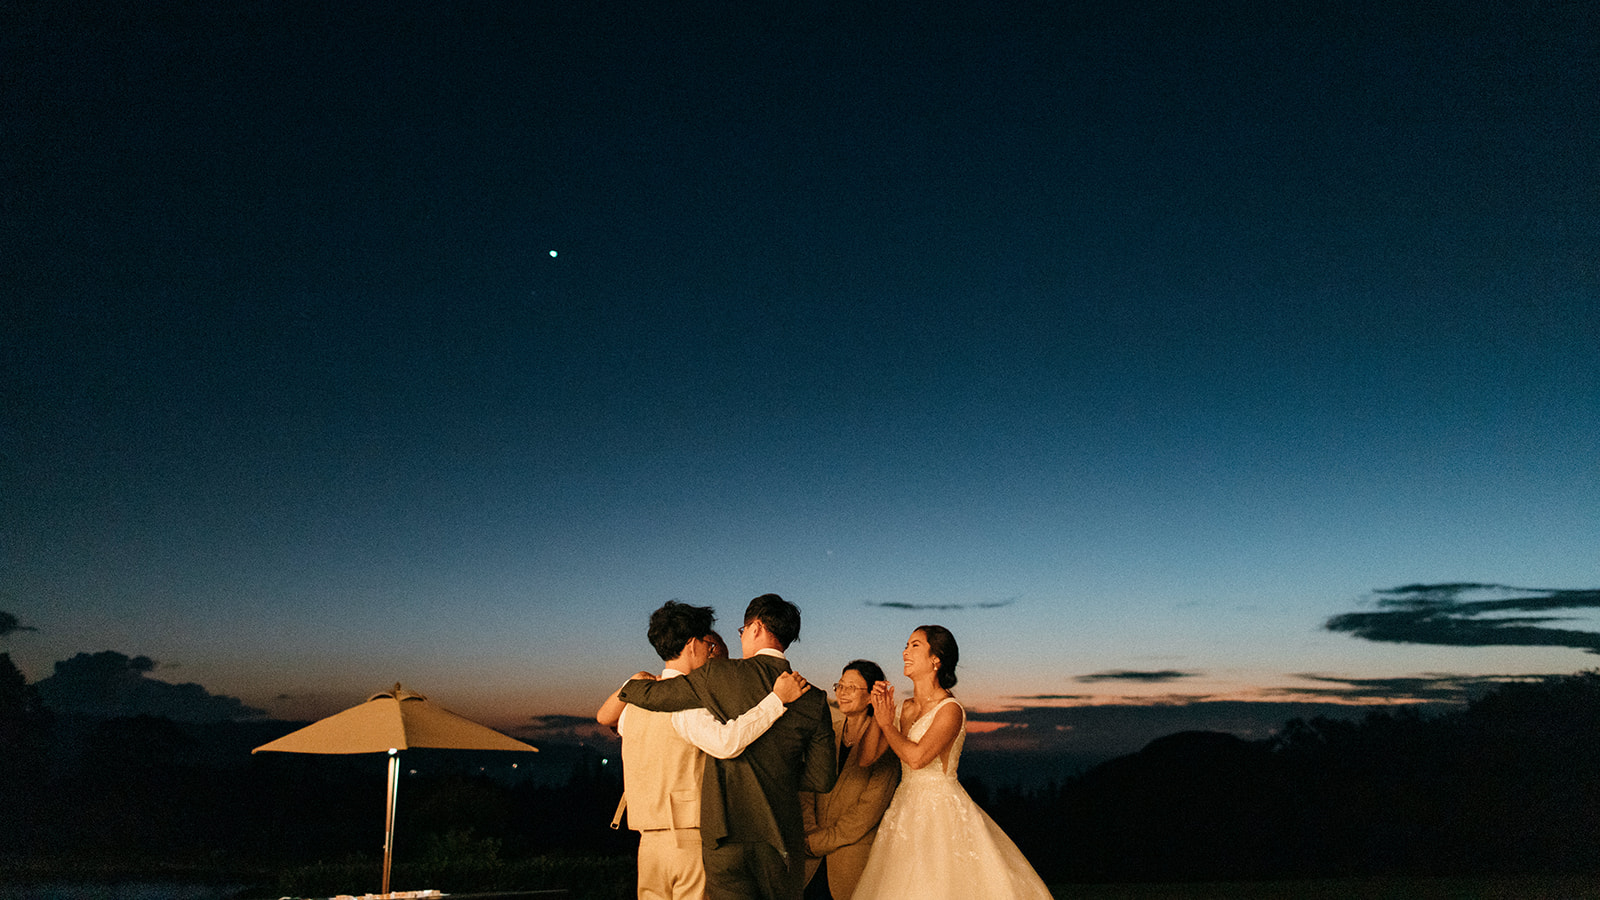 How you get meaningful yet artistic images from your wedding in Hawaii